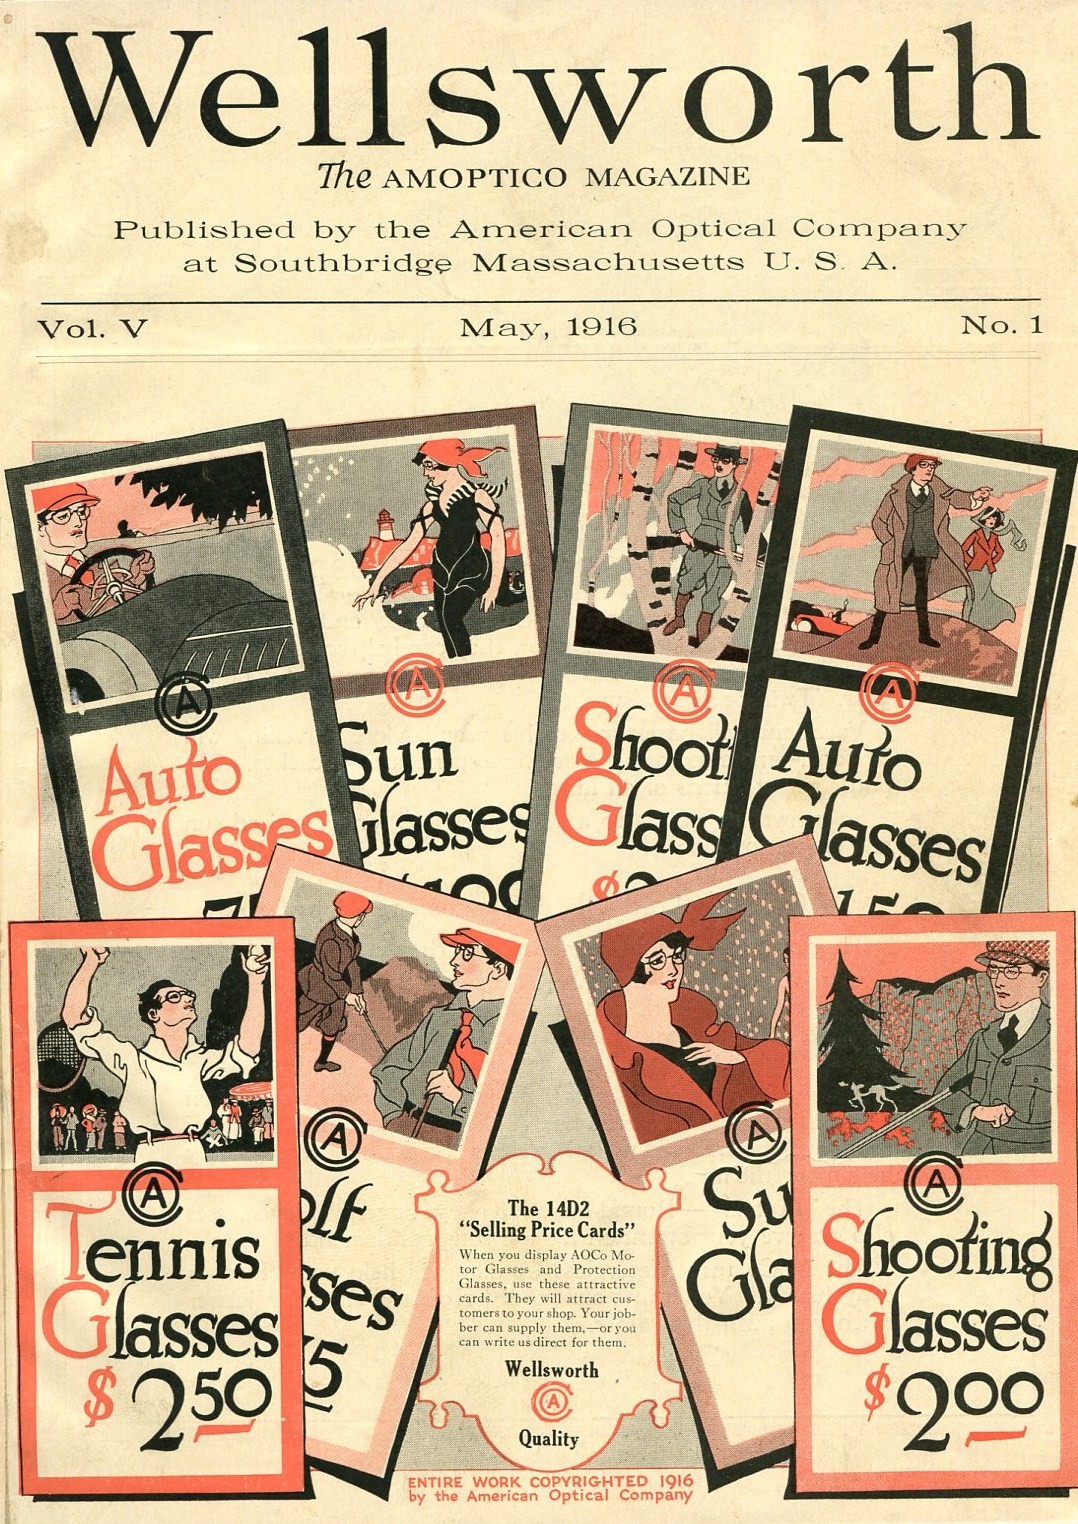 img642 may 1916 front cover.jpg